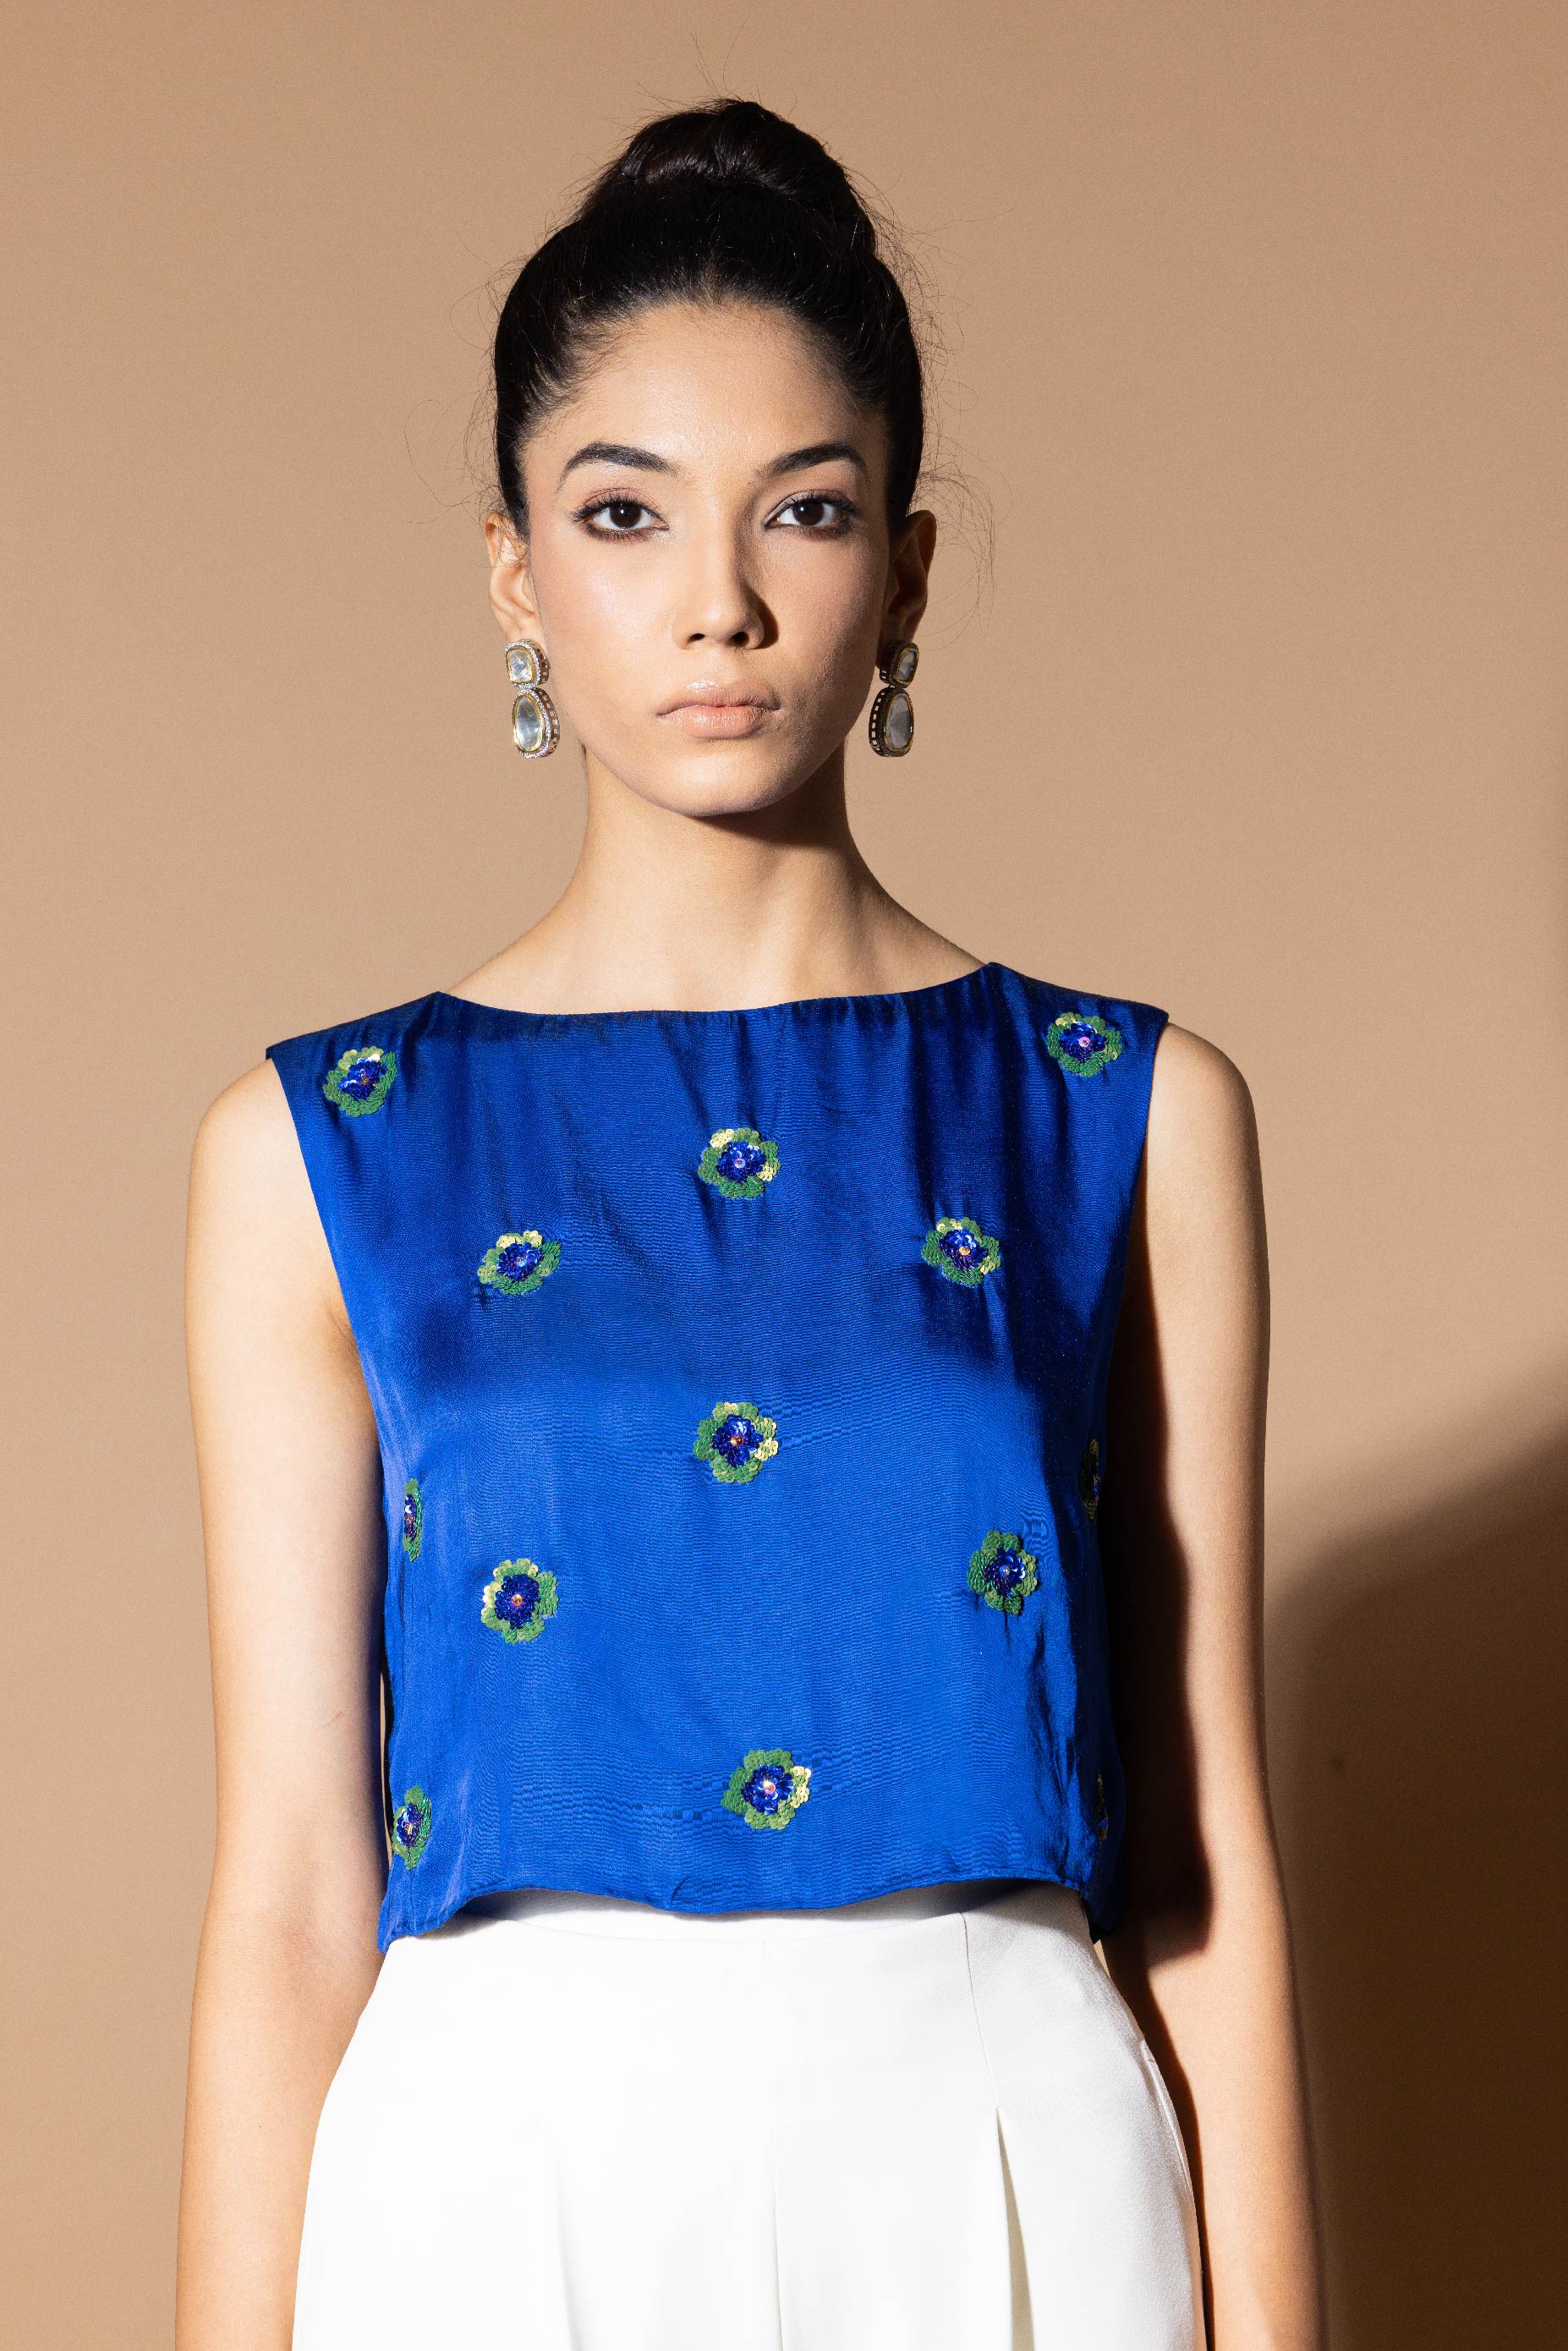 Celestial blue crop top with floral embellishment